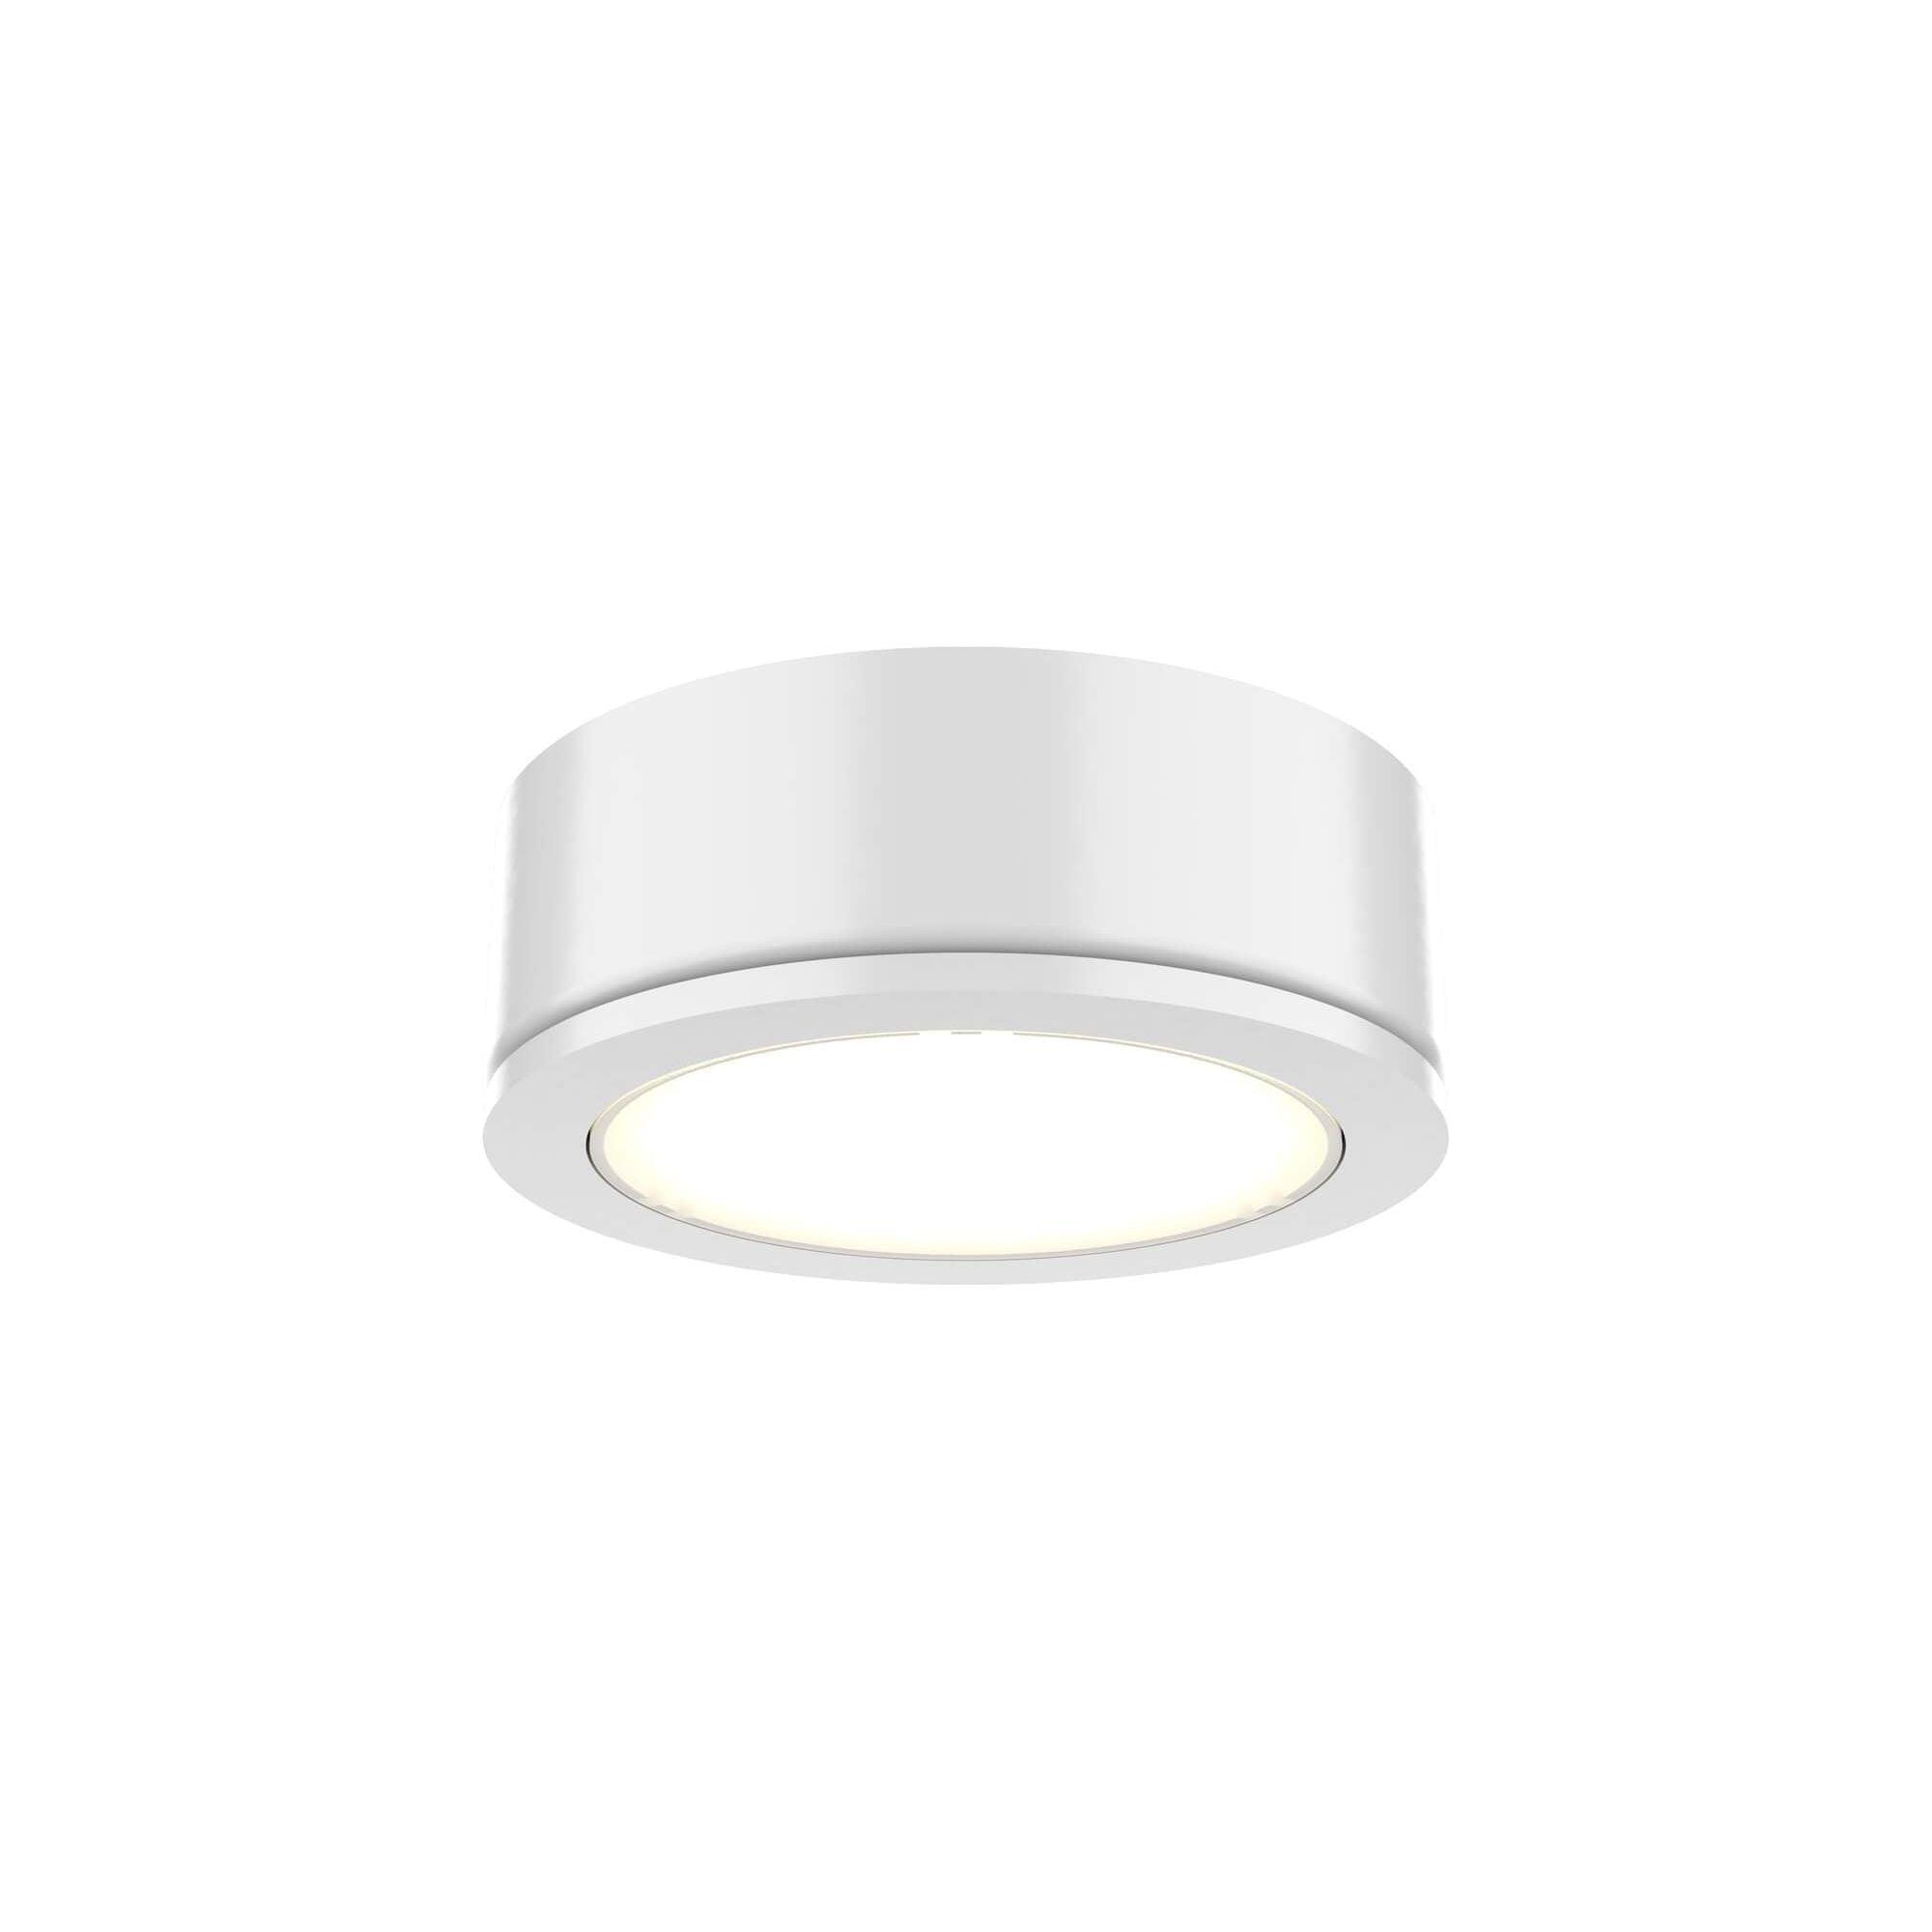 DALS - Powerled Under Cabinet Puck Light - Lights Canada